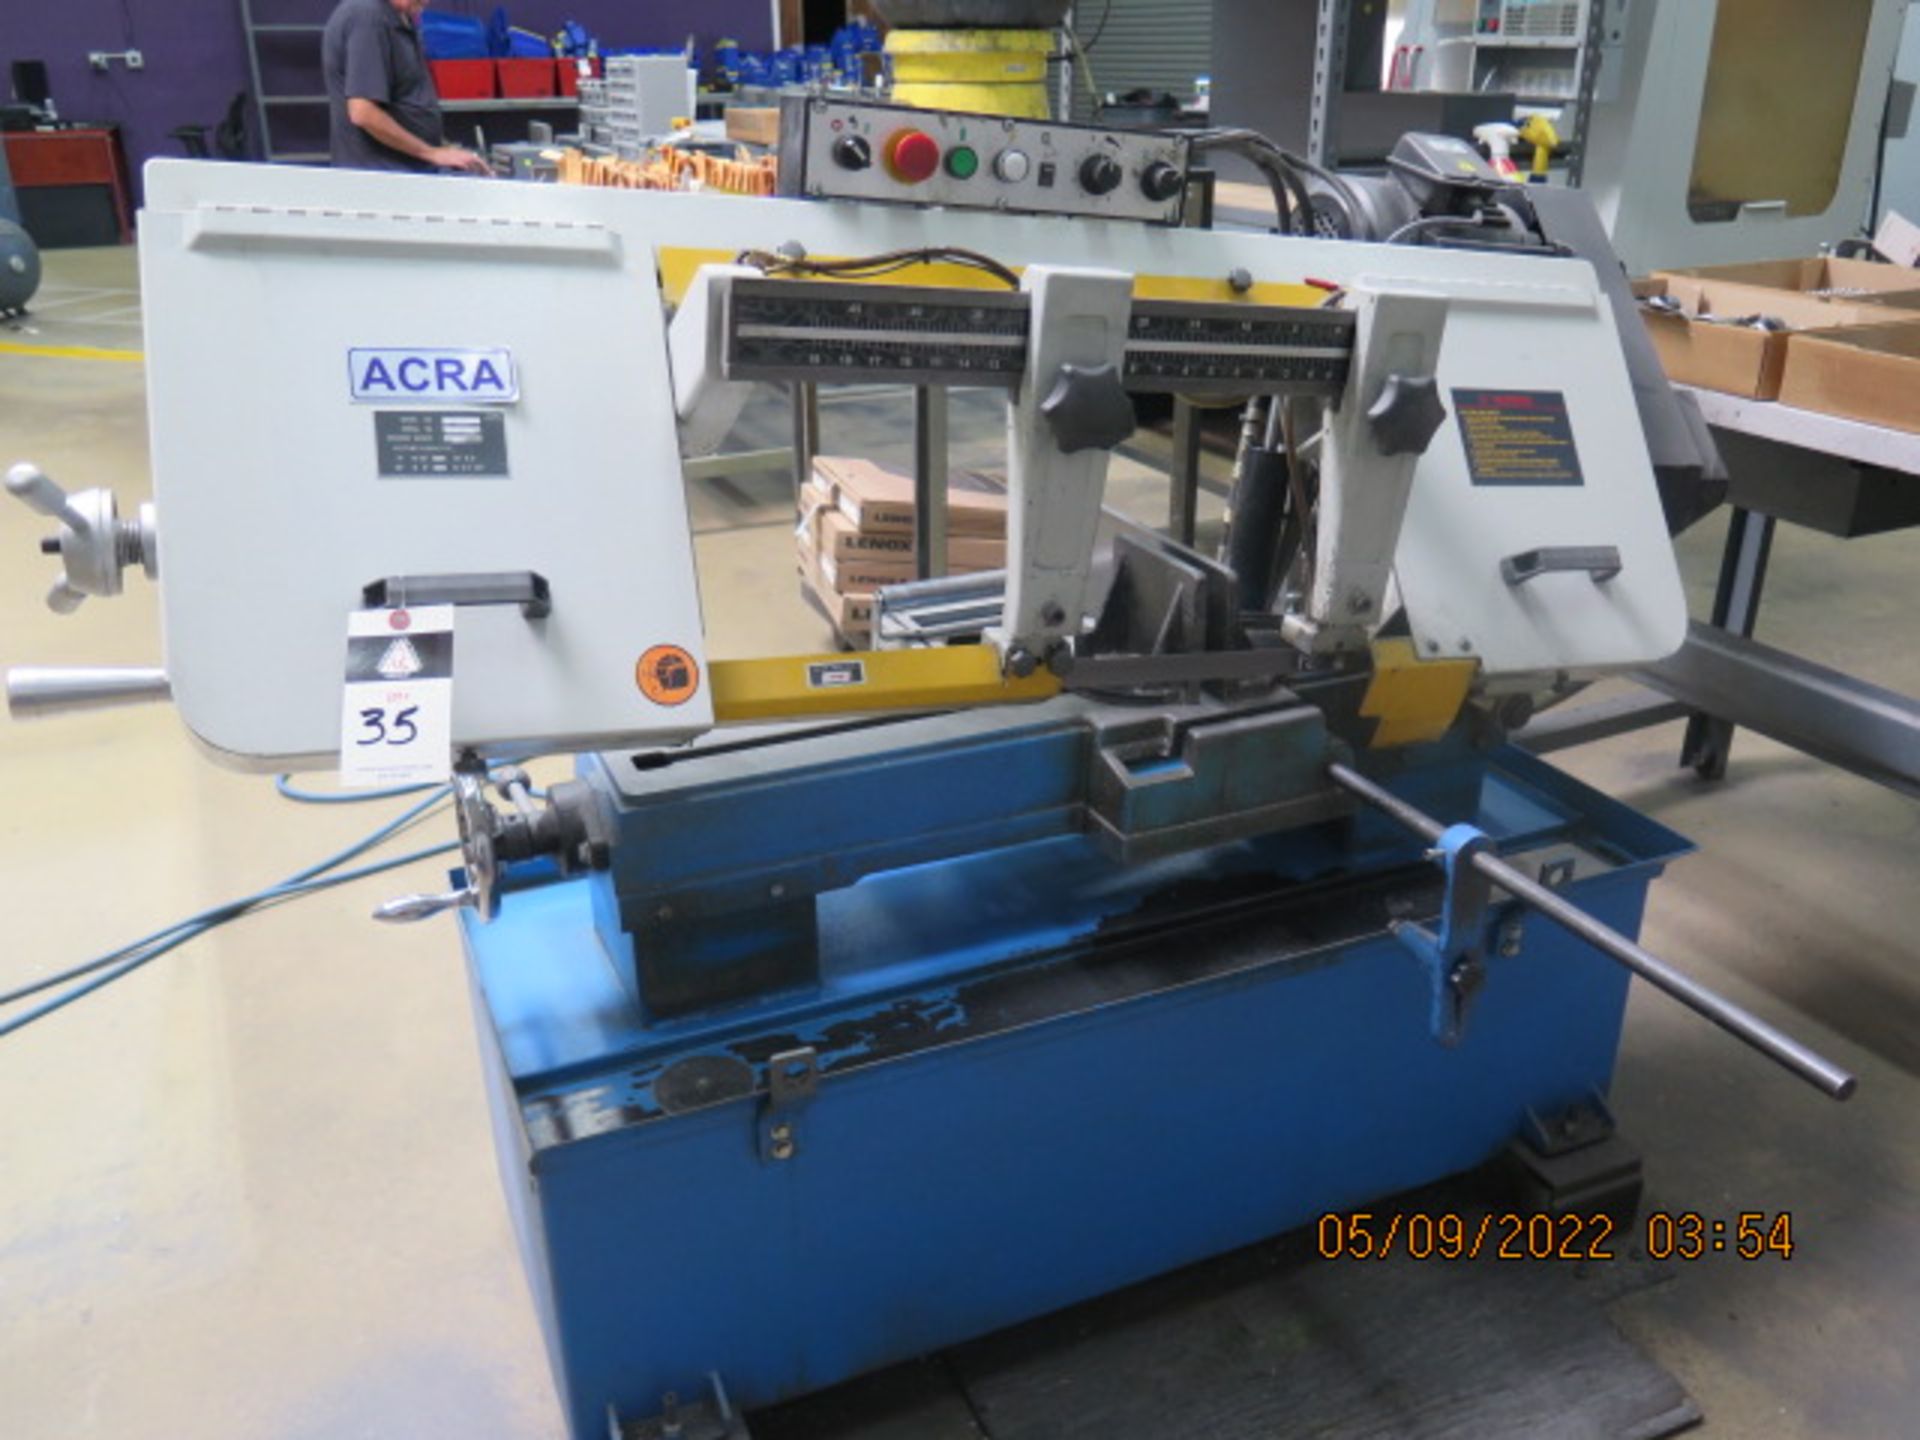 Acra RF-1018SV 10” Horizontal Miter Band Saw s/n 59H1631 w/ Manual Clamping, Work Stop, SOLD AS IS